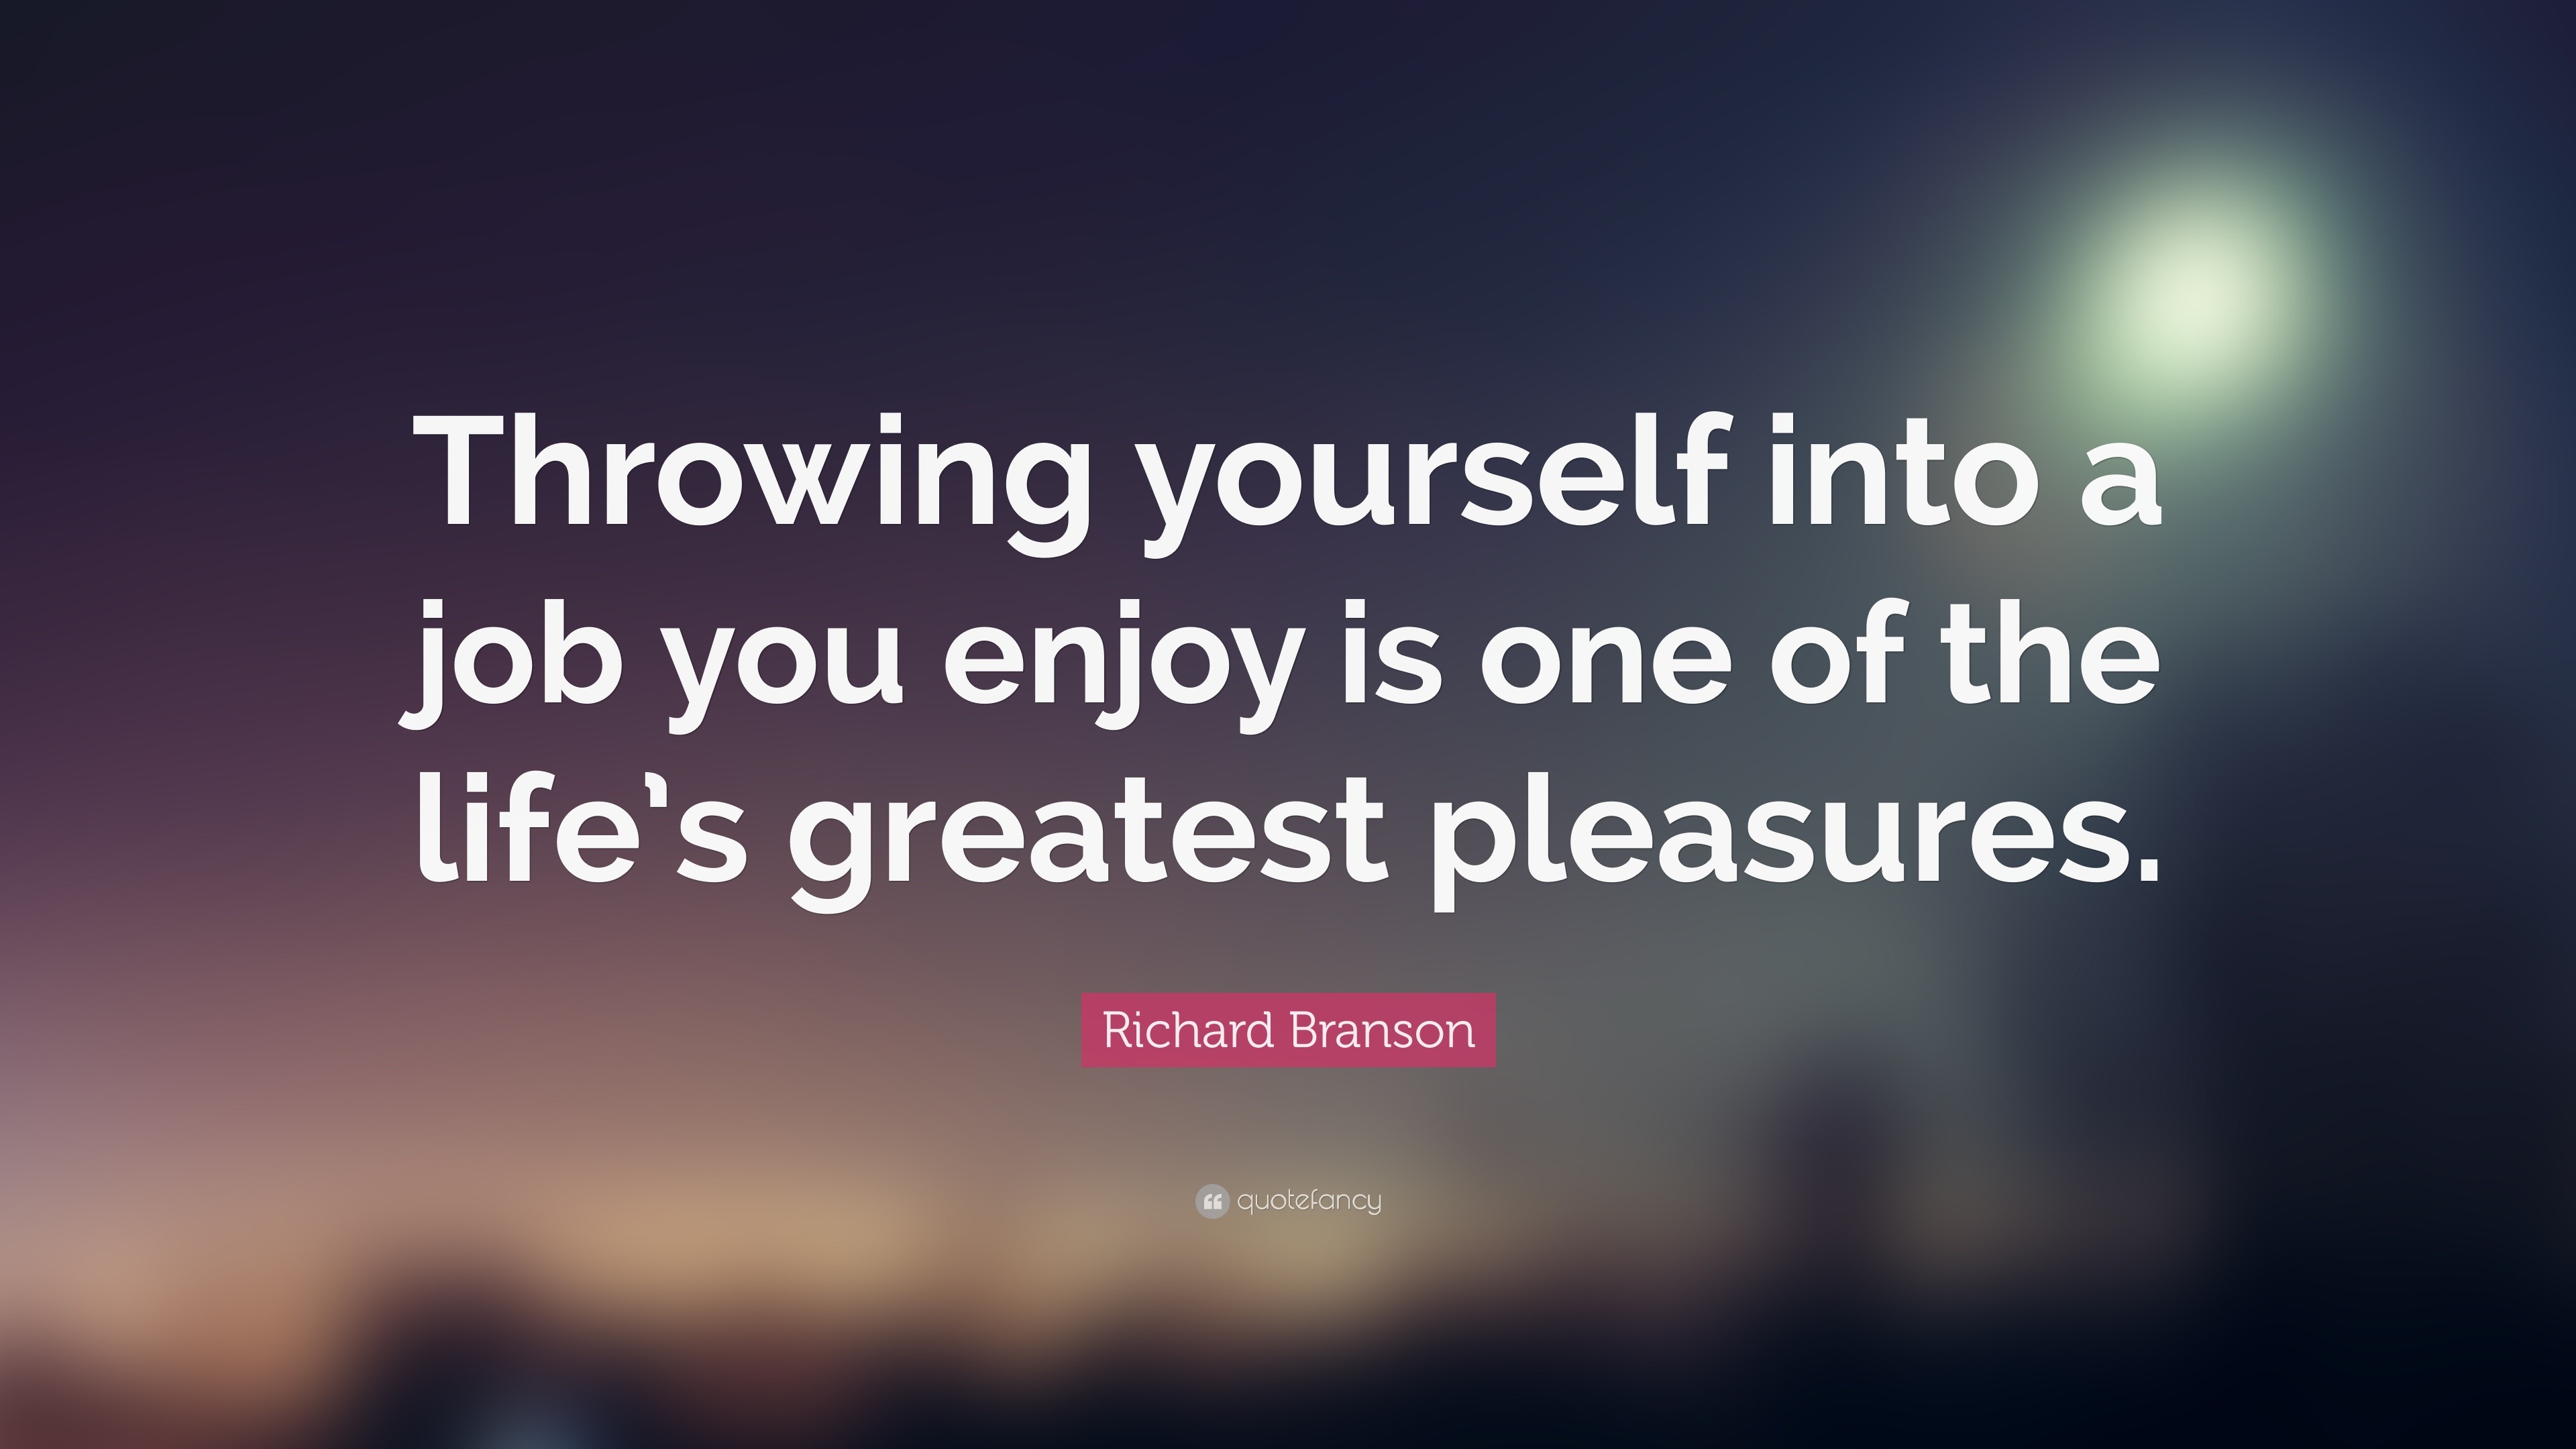 Richard Branson Quote “Throwing yourself into a job you enjoy is one of the